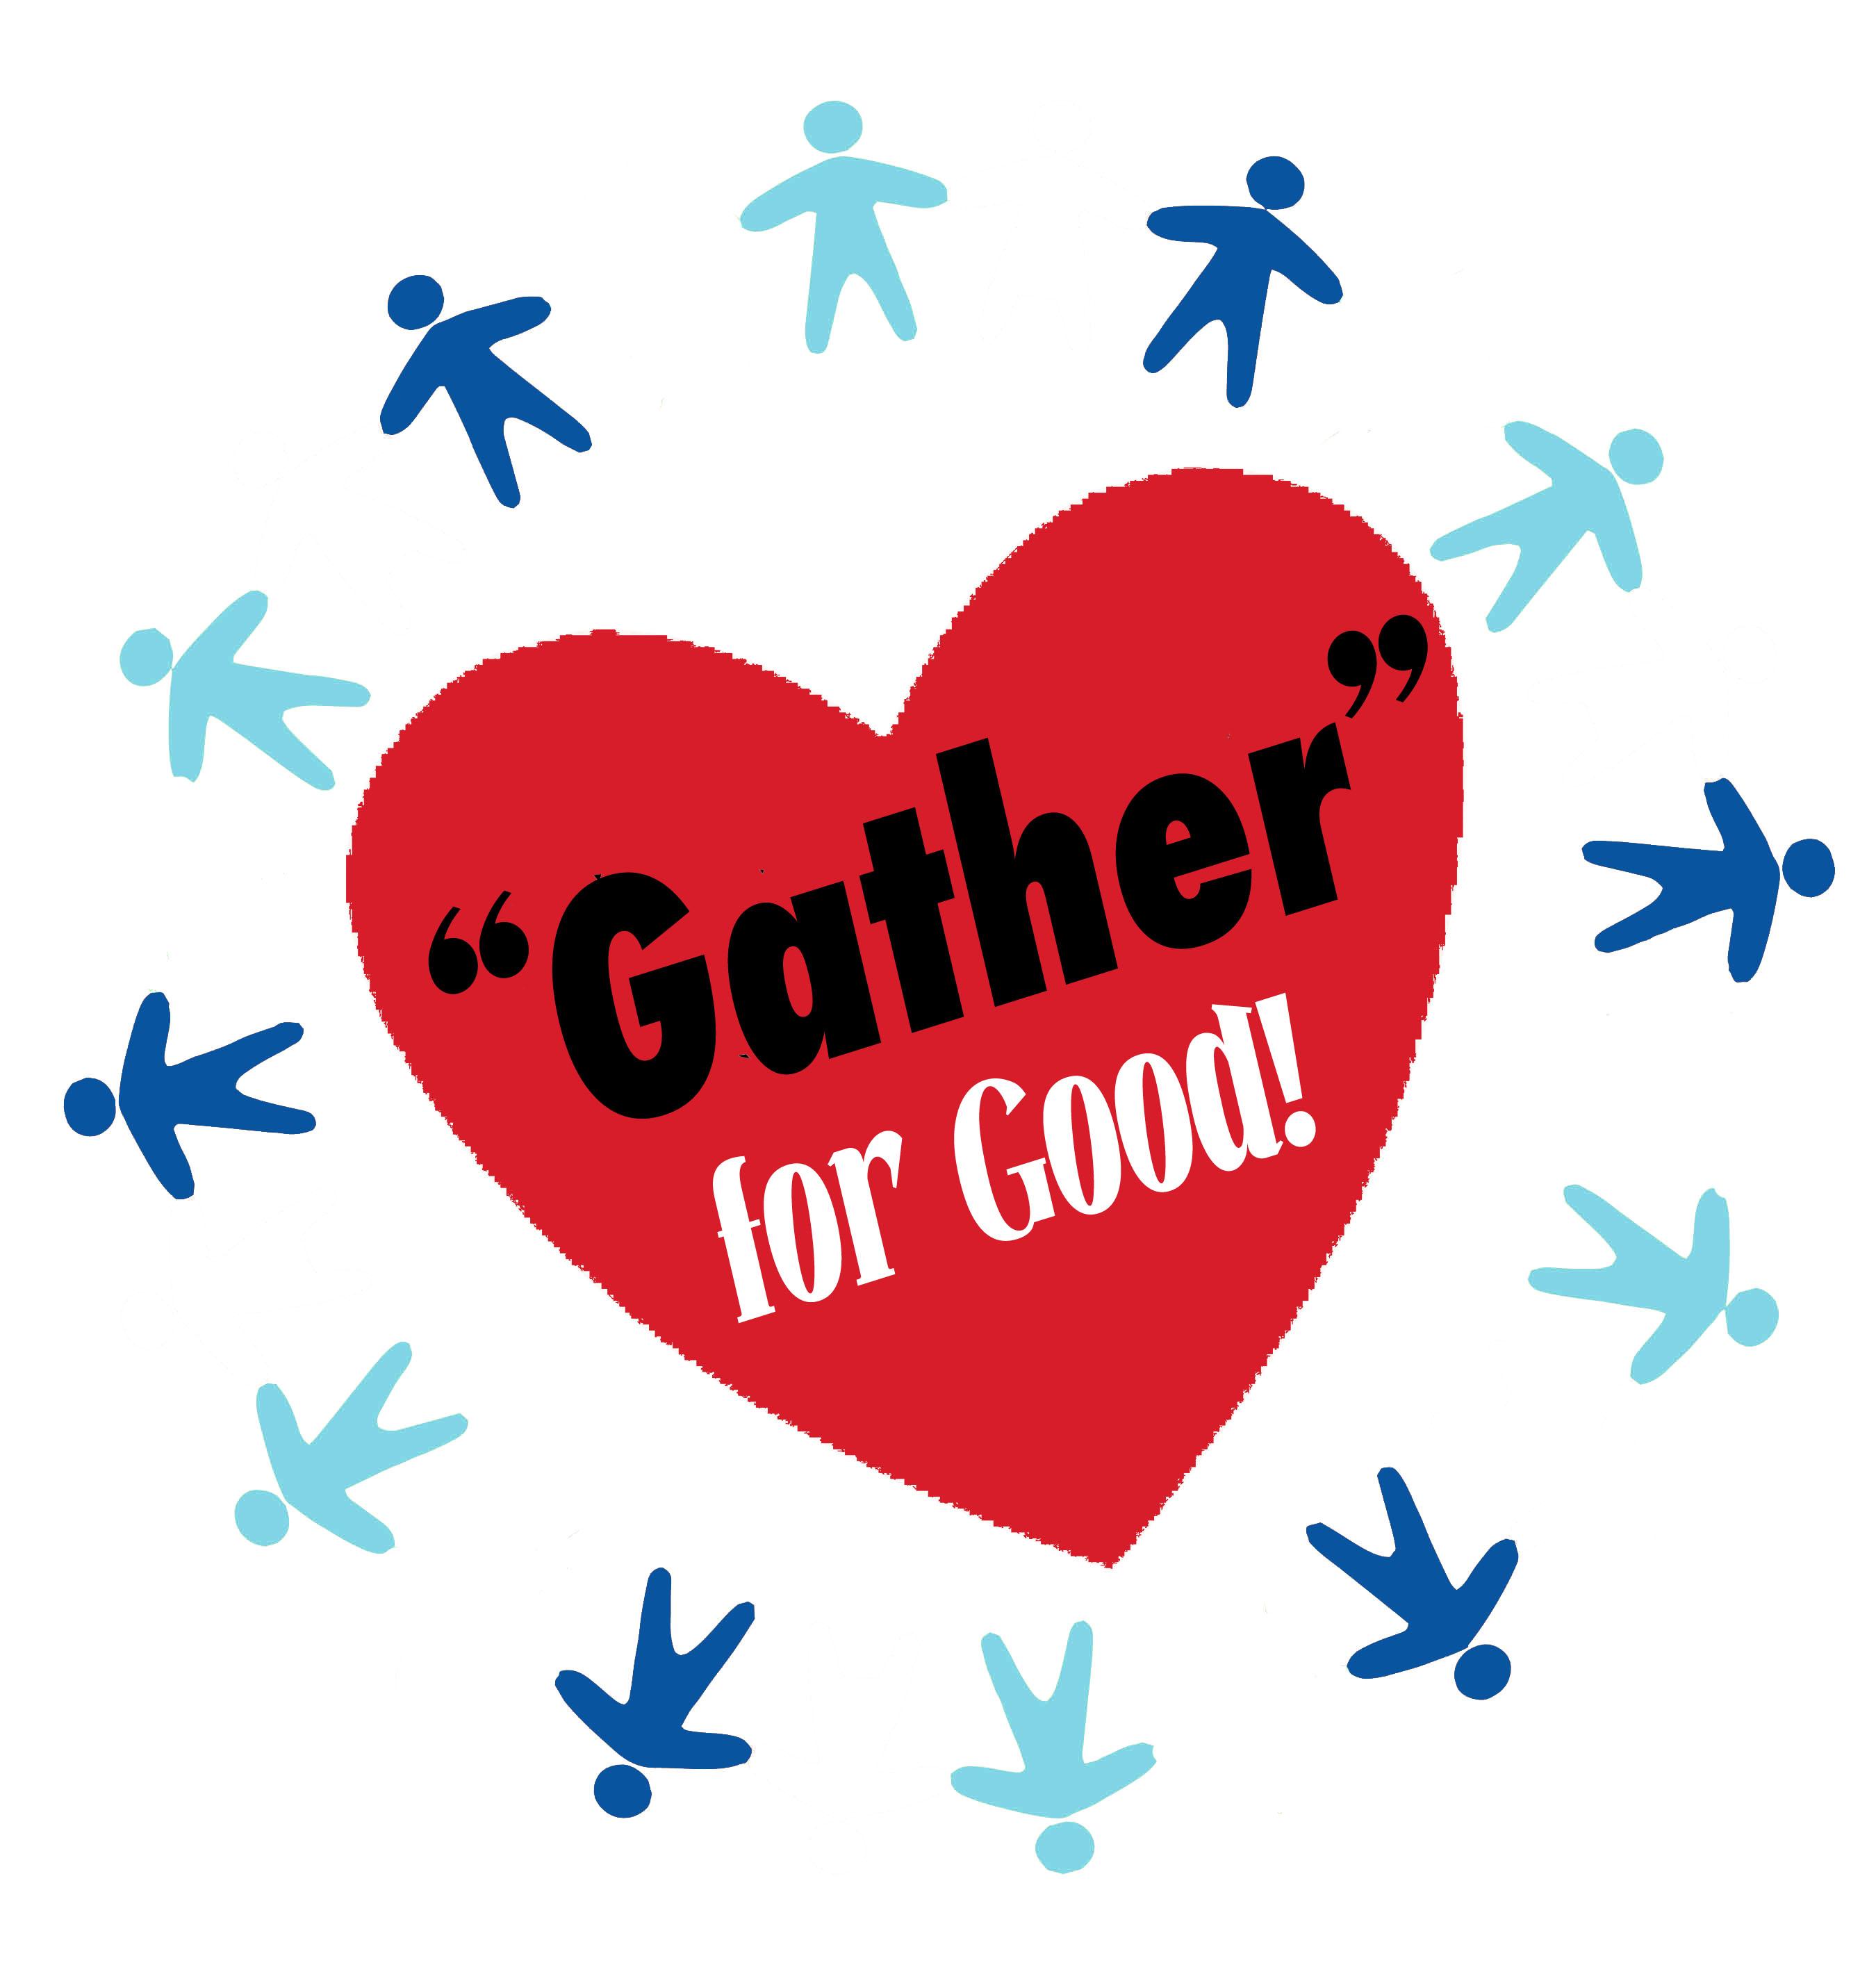 Gather for Good